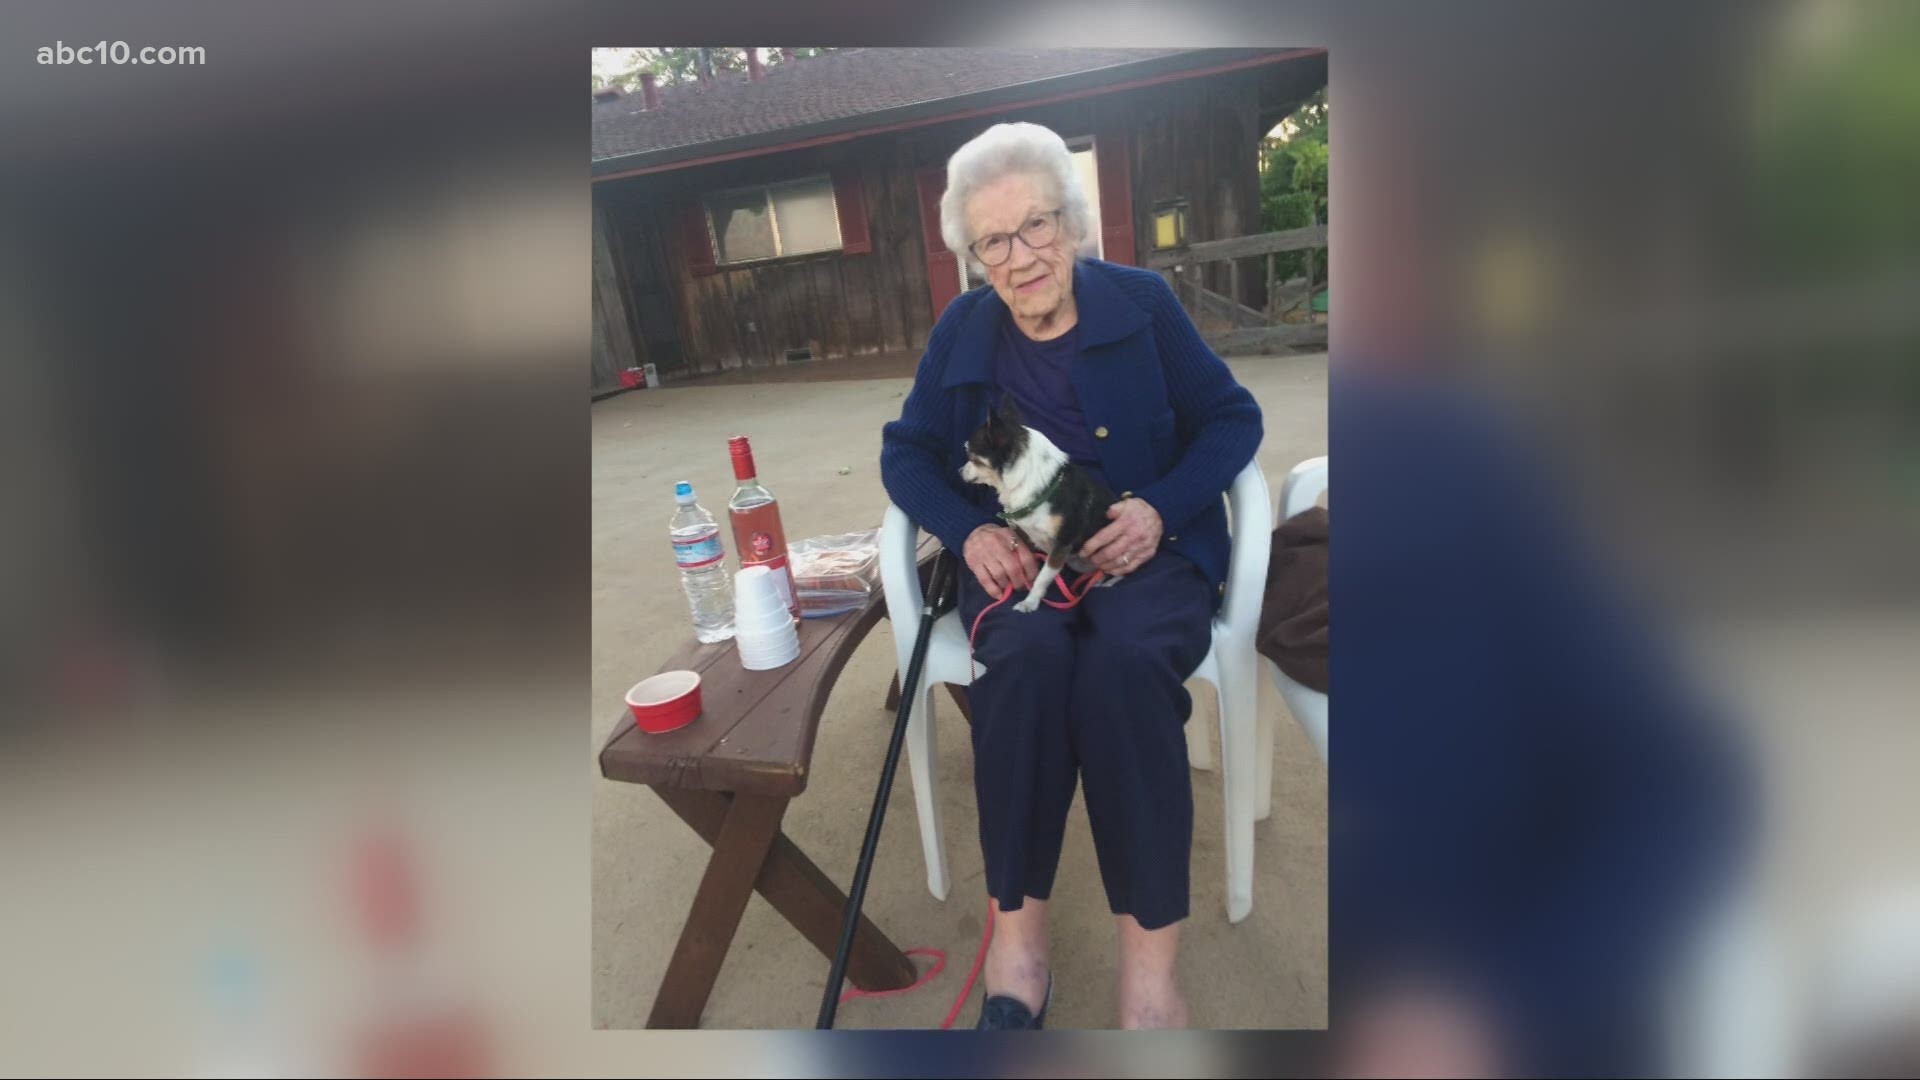 Velda Parsons of Sacramento is turning 106 years old. She talks with Kevin John about living through the 1918 flu pandemic and the current coronavirus pandemic.